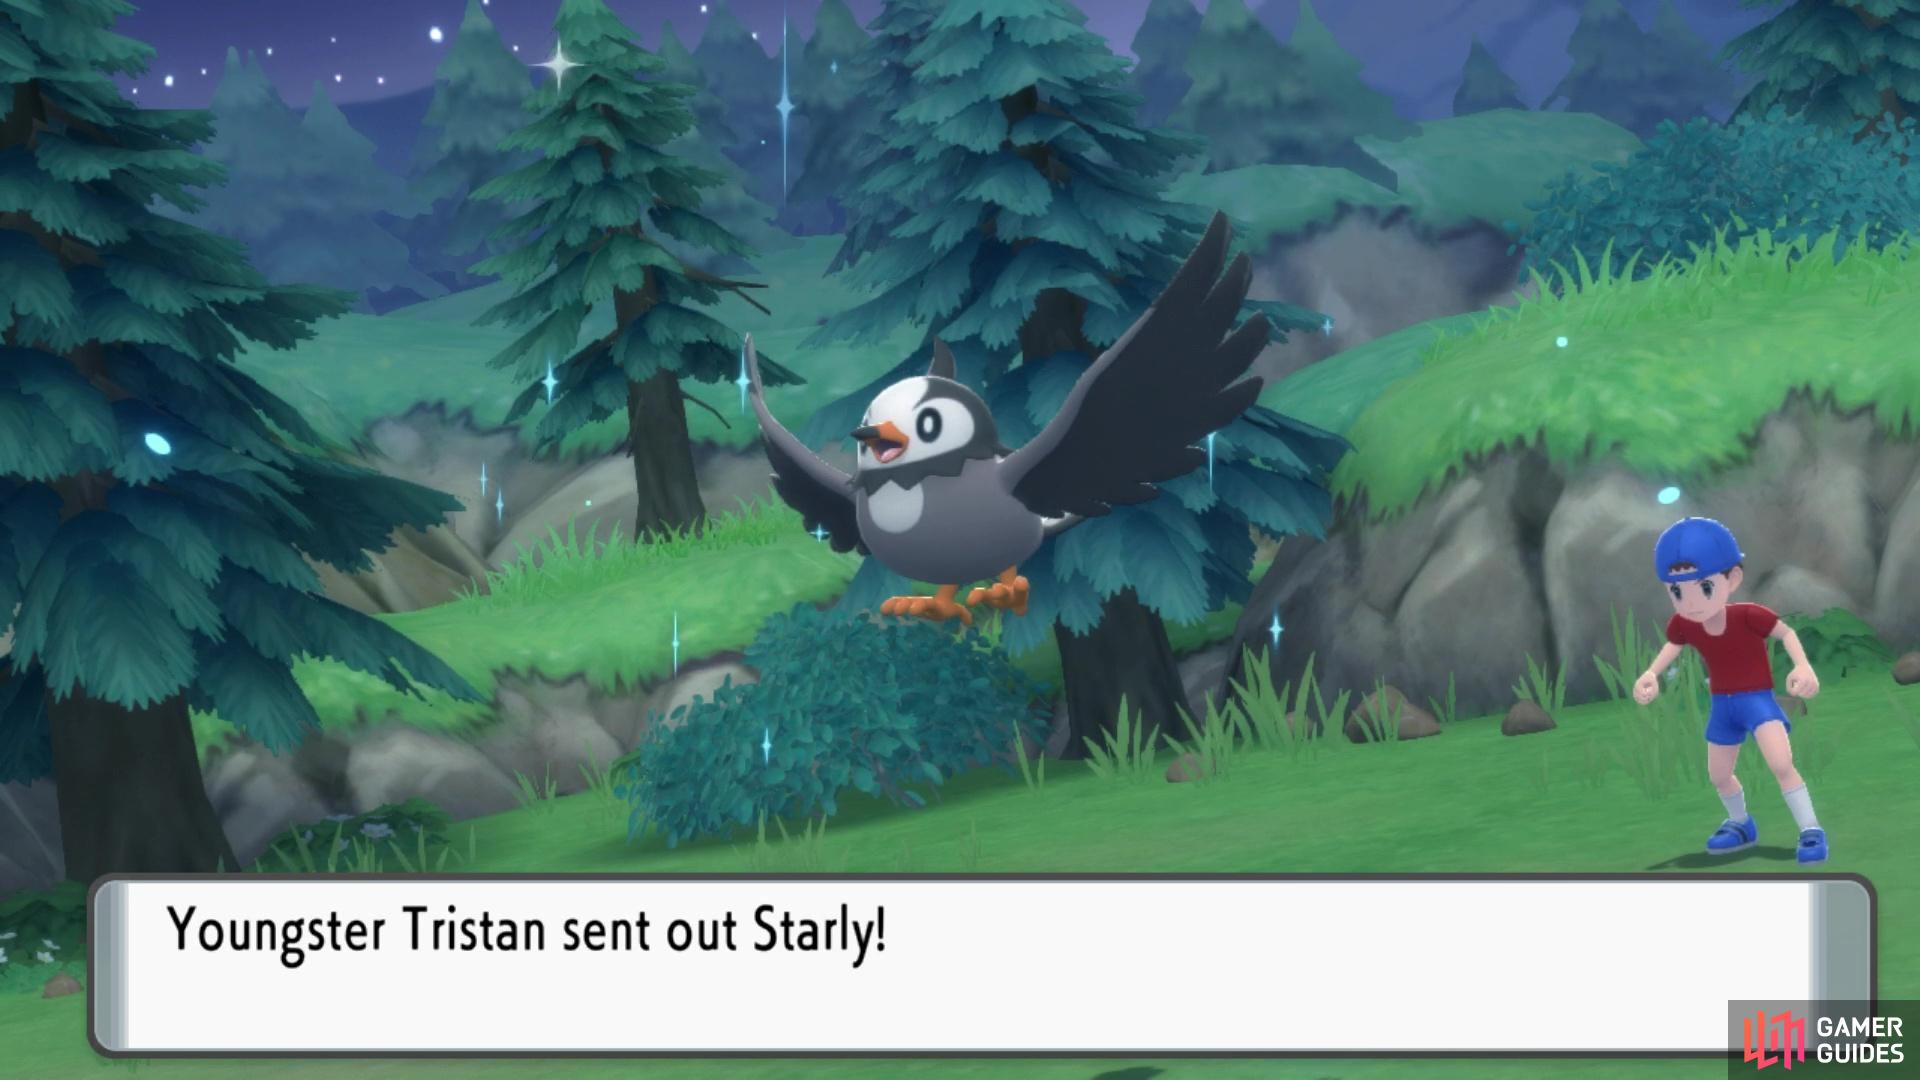 Youngster Tristan challenges you with his Starly!